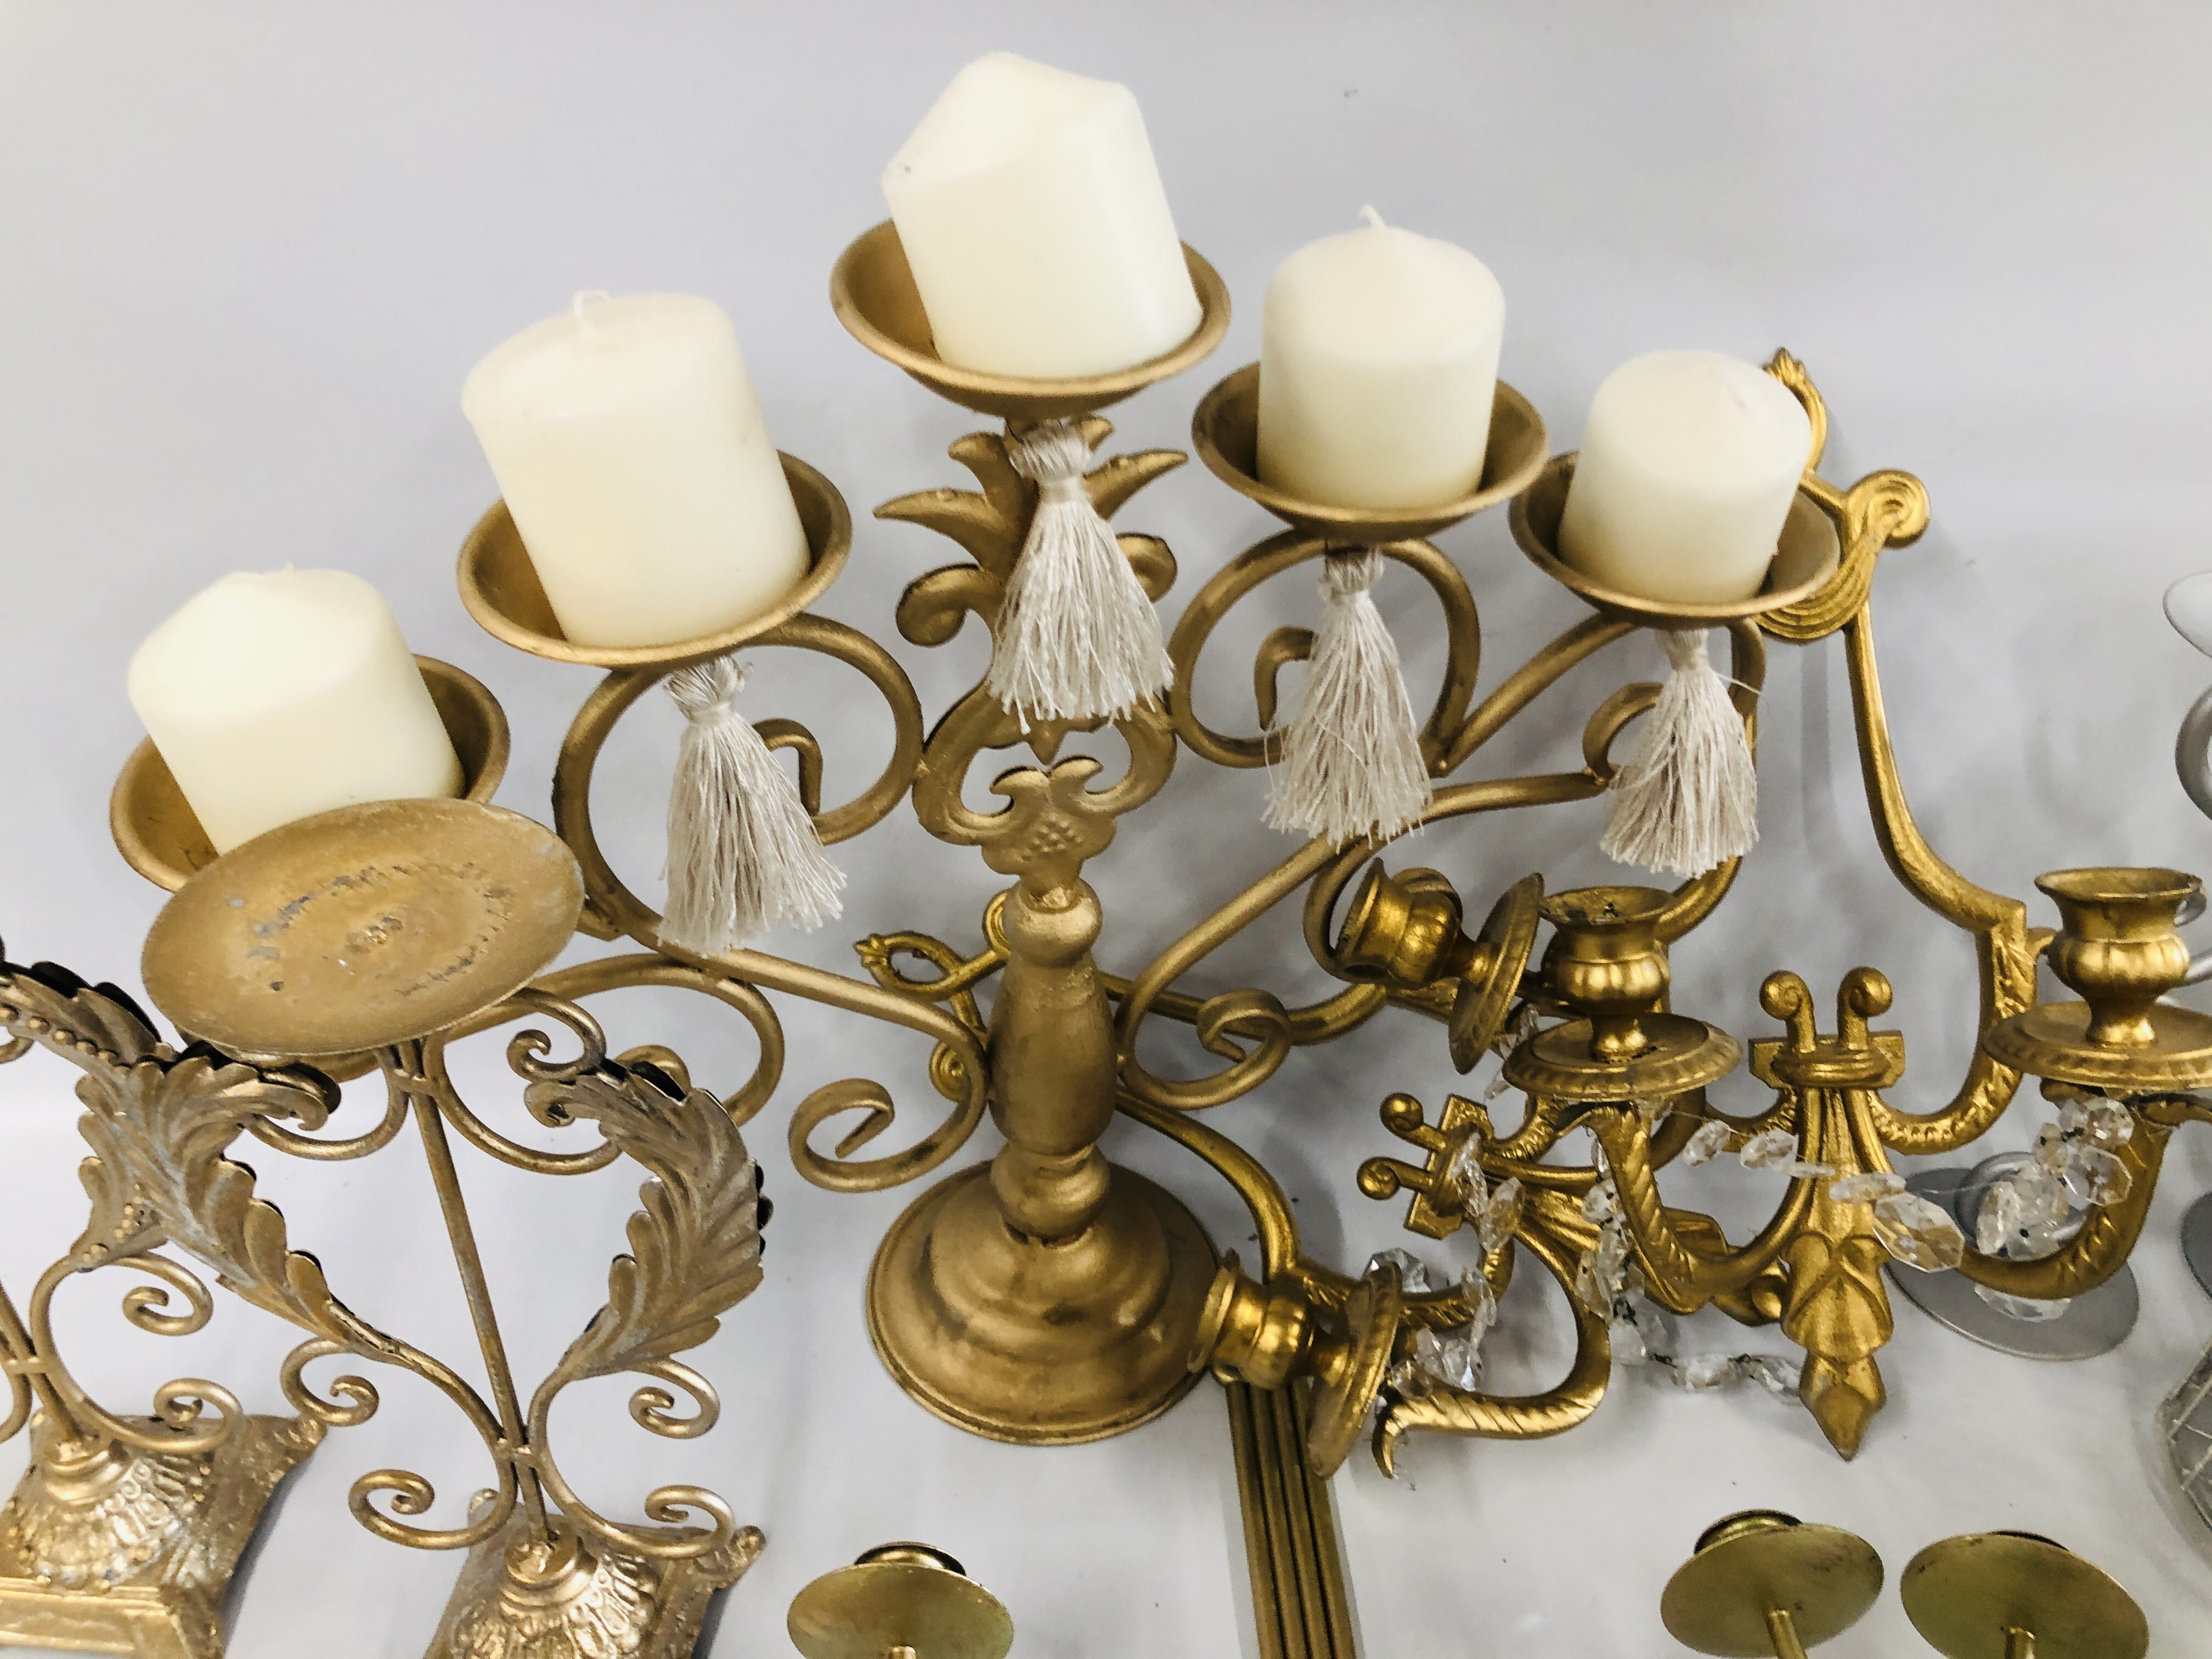 LARGE BOX OF ASSORTED MODERN SHABBY CHIC METAL CRAFT CANDLE STICKS, STANDS AND WALL SCONCES, ETC. - Image 4 of 8